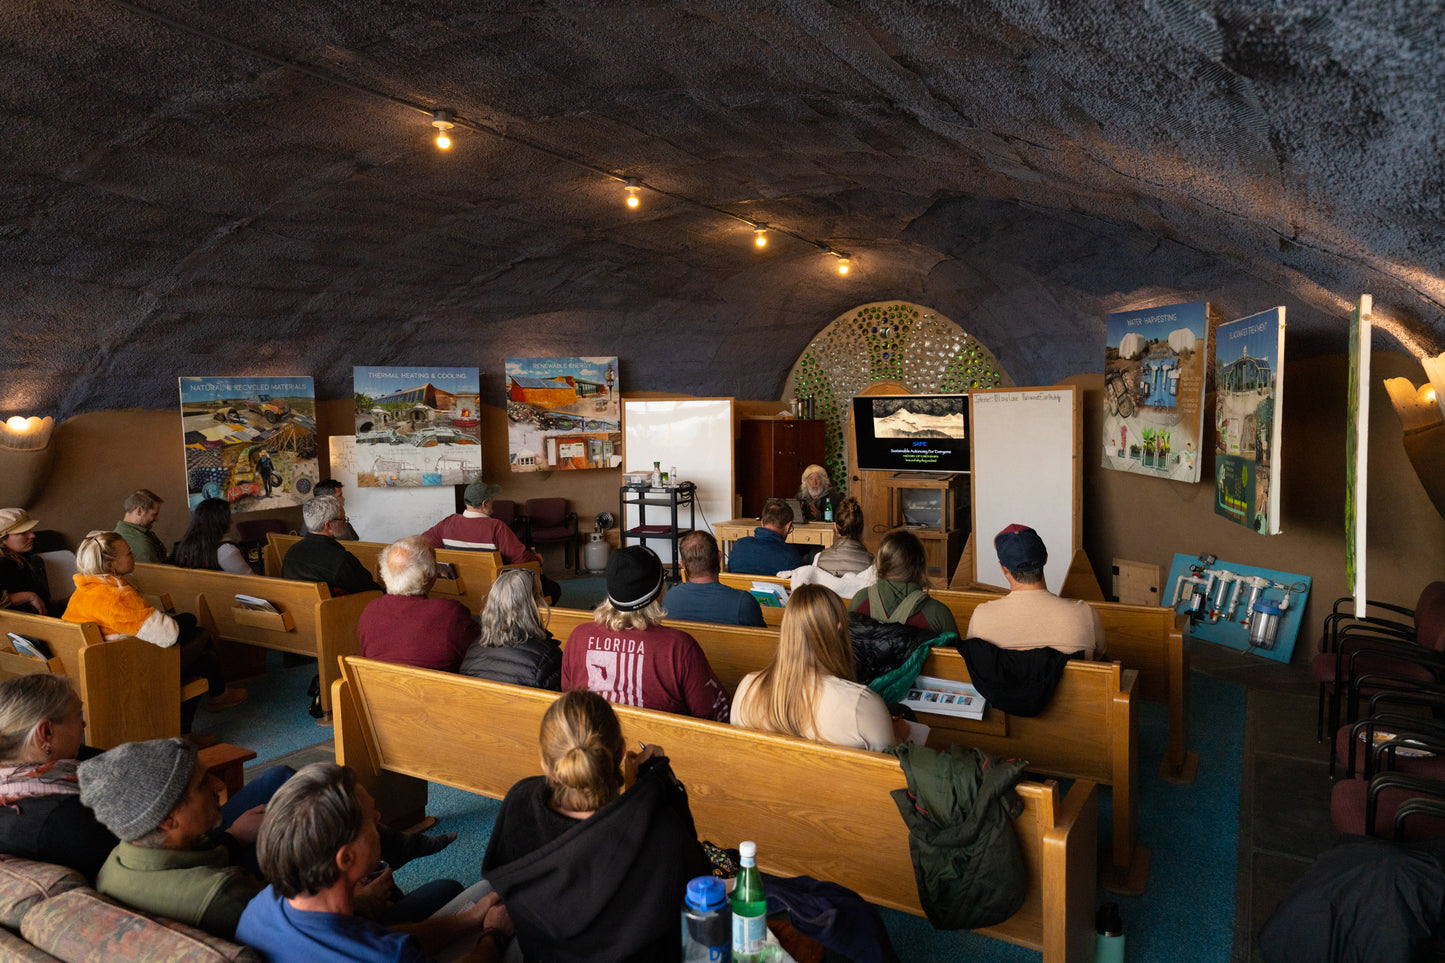 Earthship Seminar Hosted By Michael Reynolds (One Ticket)